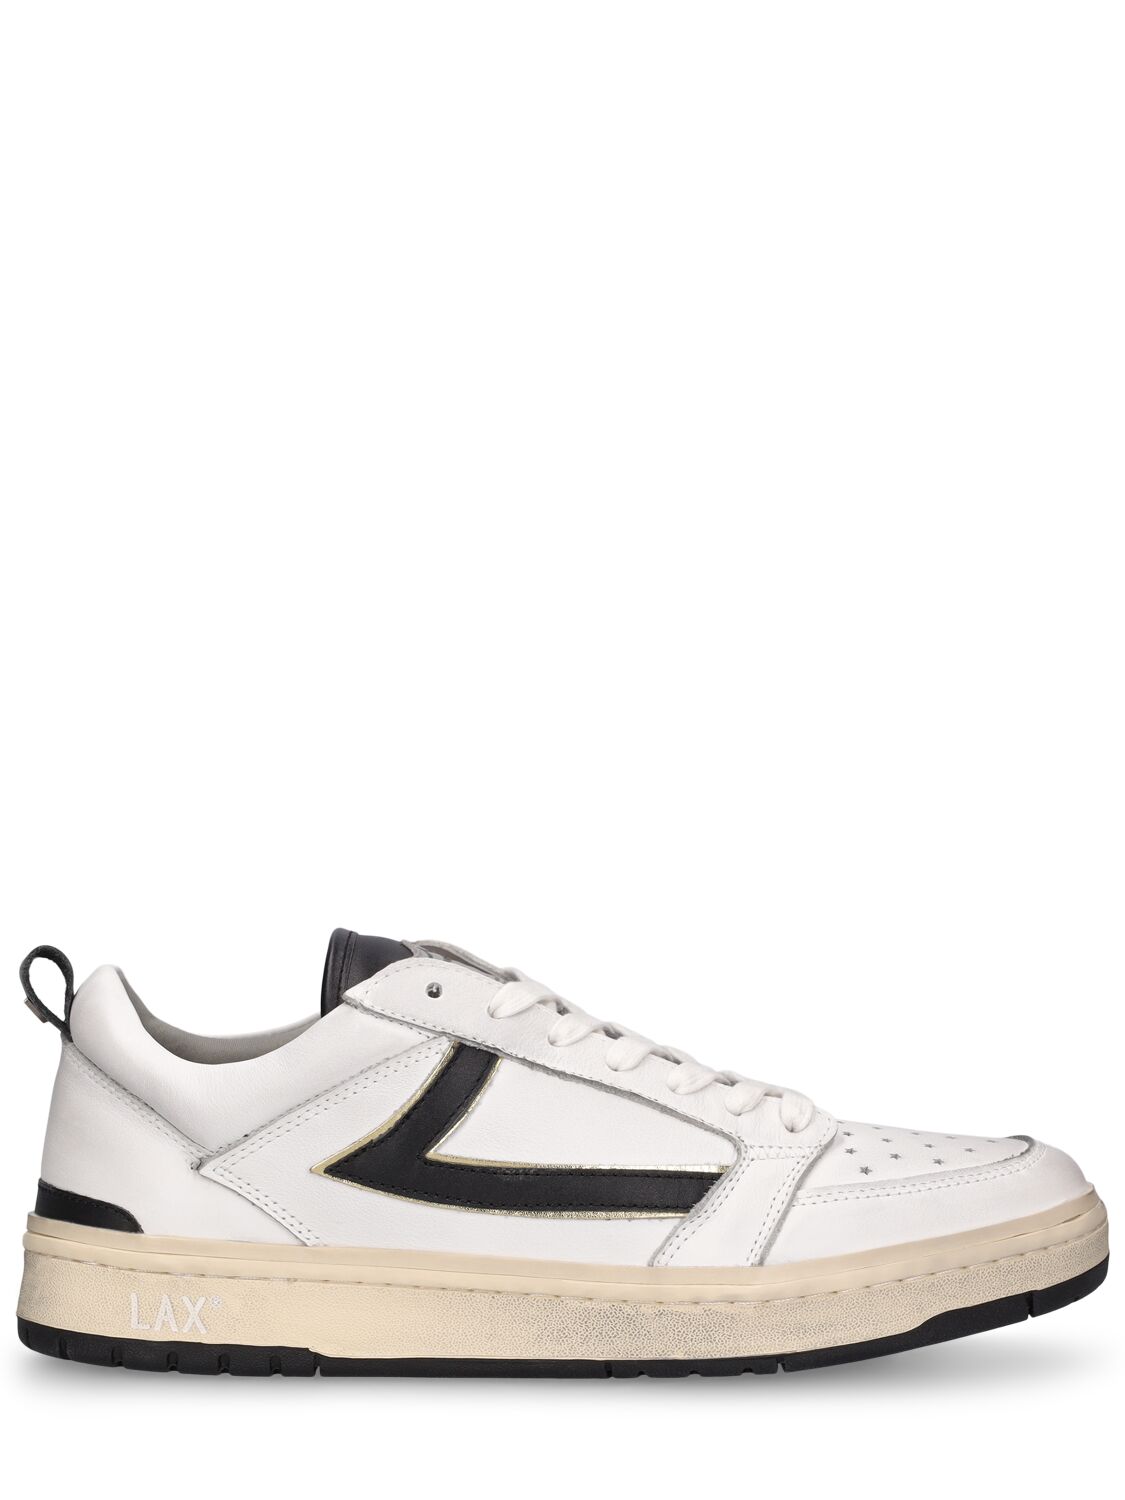 Htc Los Angeles Starlight Leather Low Top Sneakers In White,black